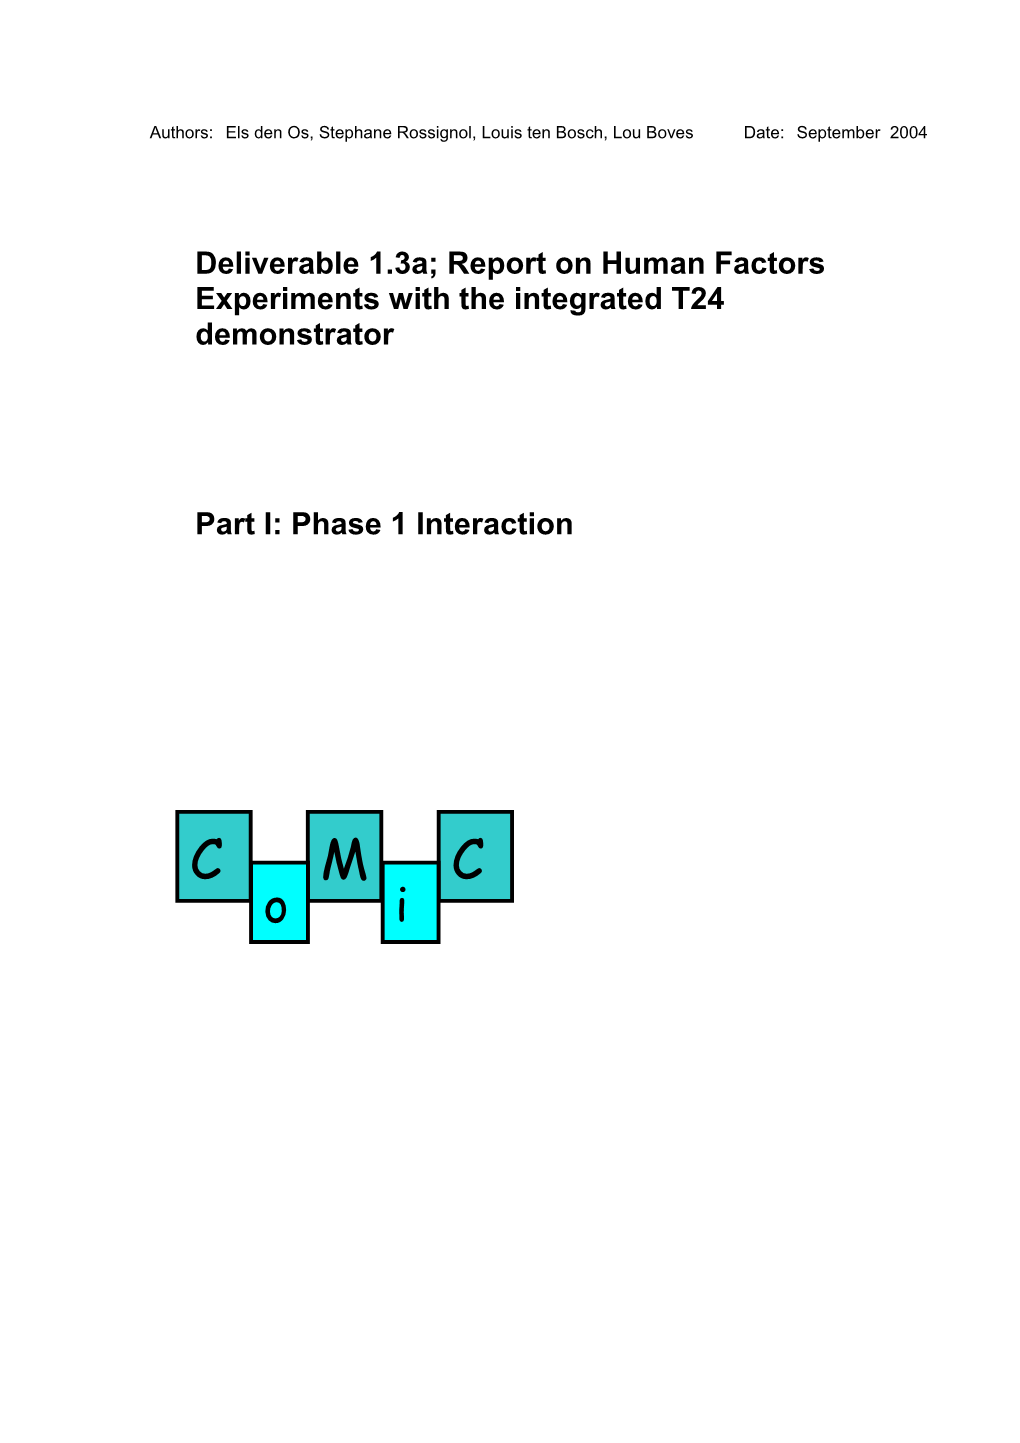 Deliverable 1.3A; Report on Human Factors Experiments with the Integrated T24 Demonstrator